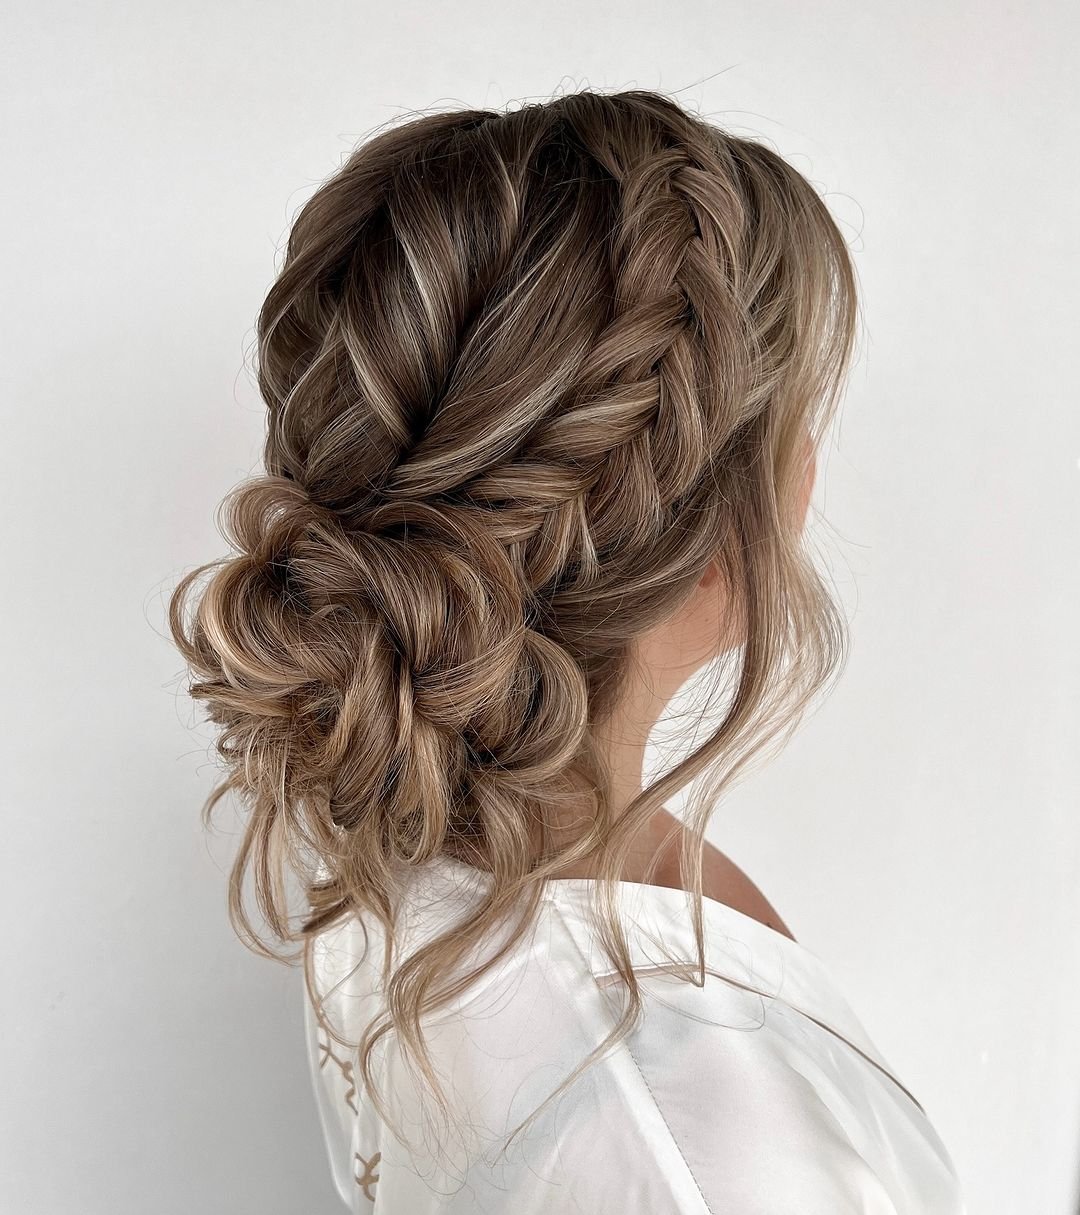 5 - Picture of Prom Hairstyles